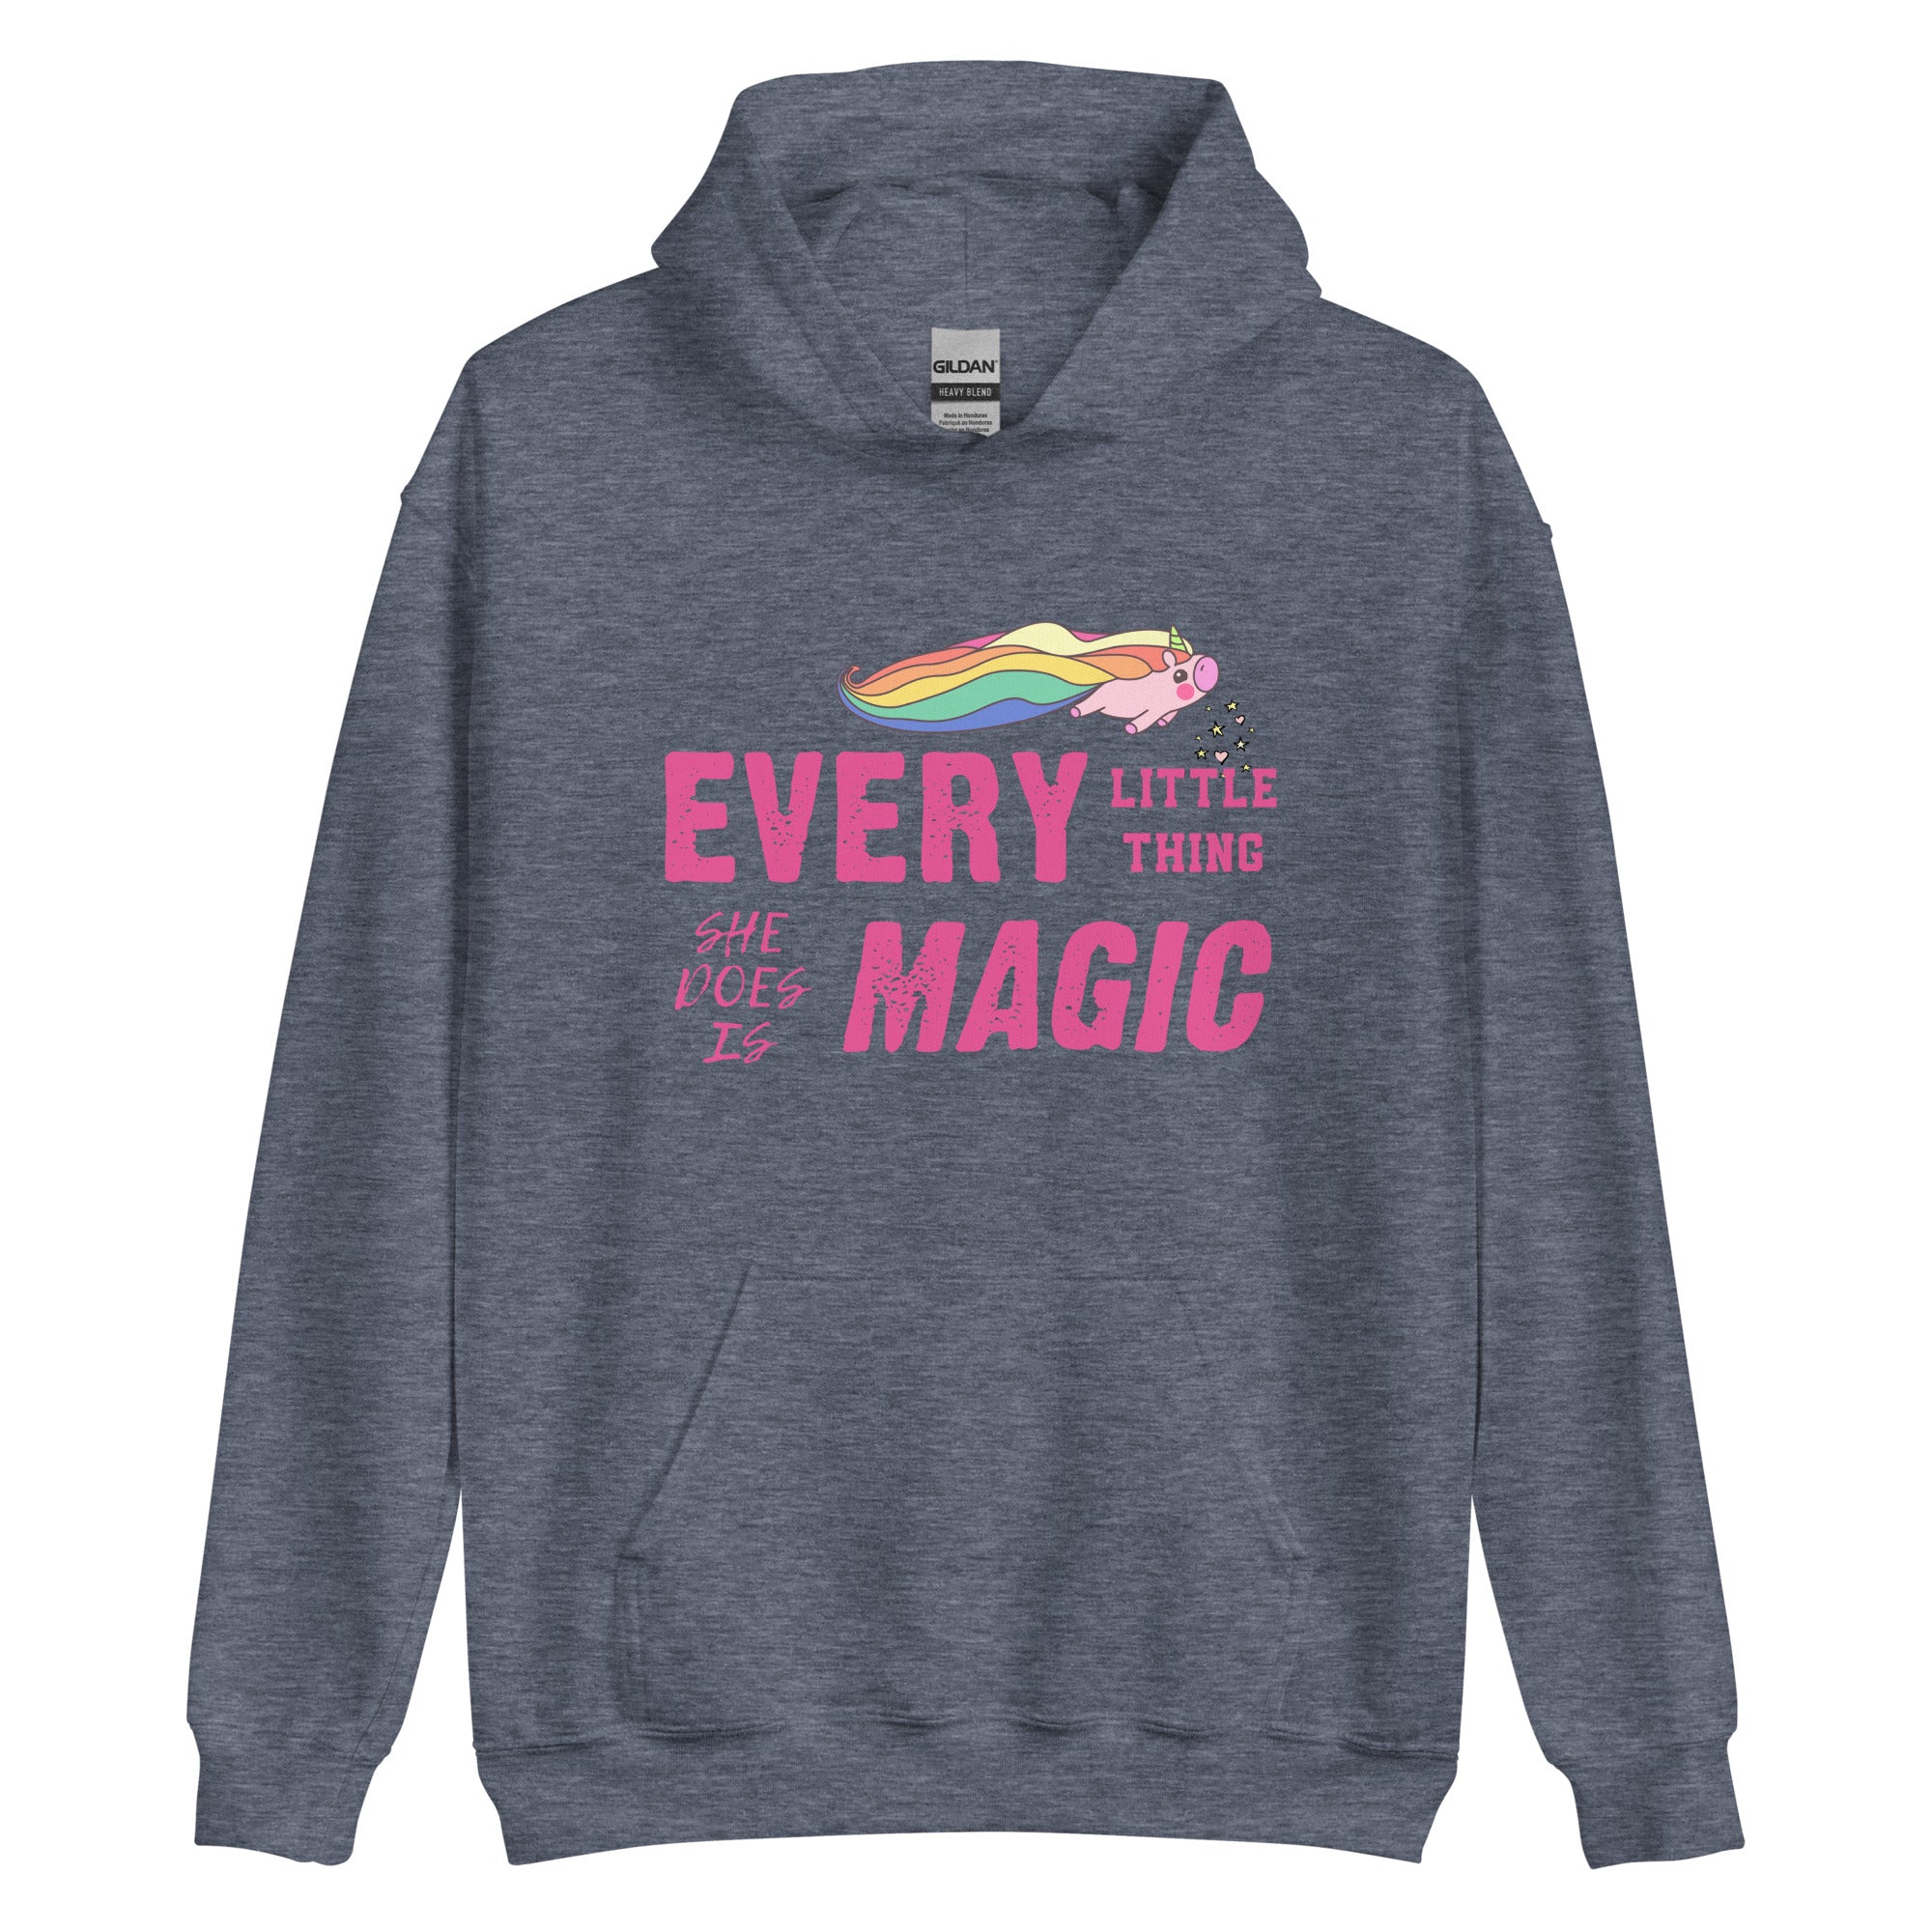 Every Little Thing She Does is Magic Hoodie for Women